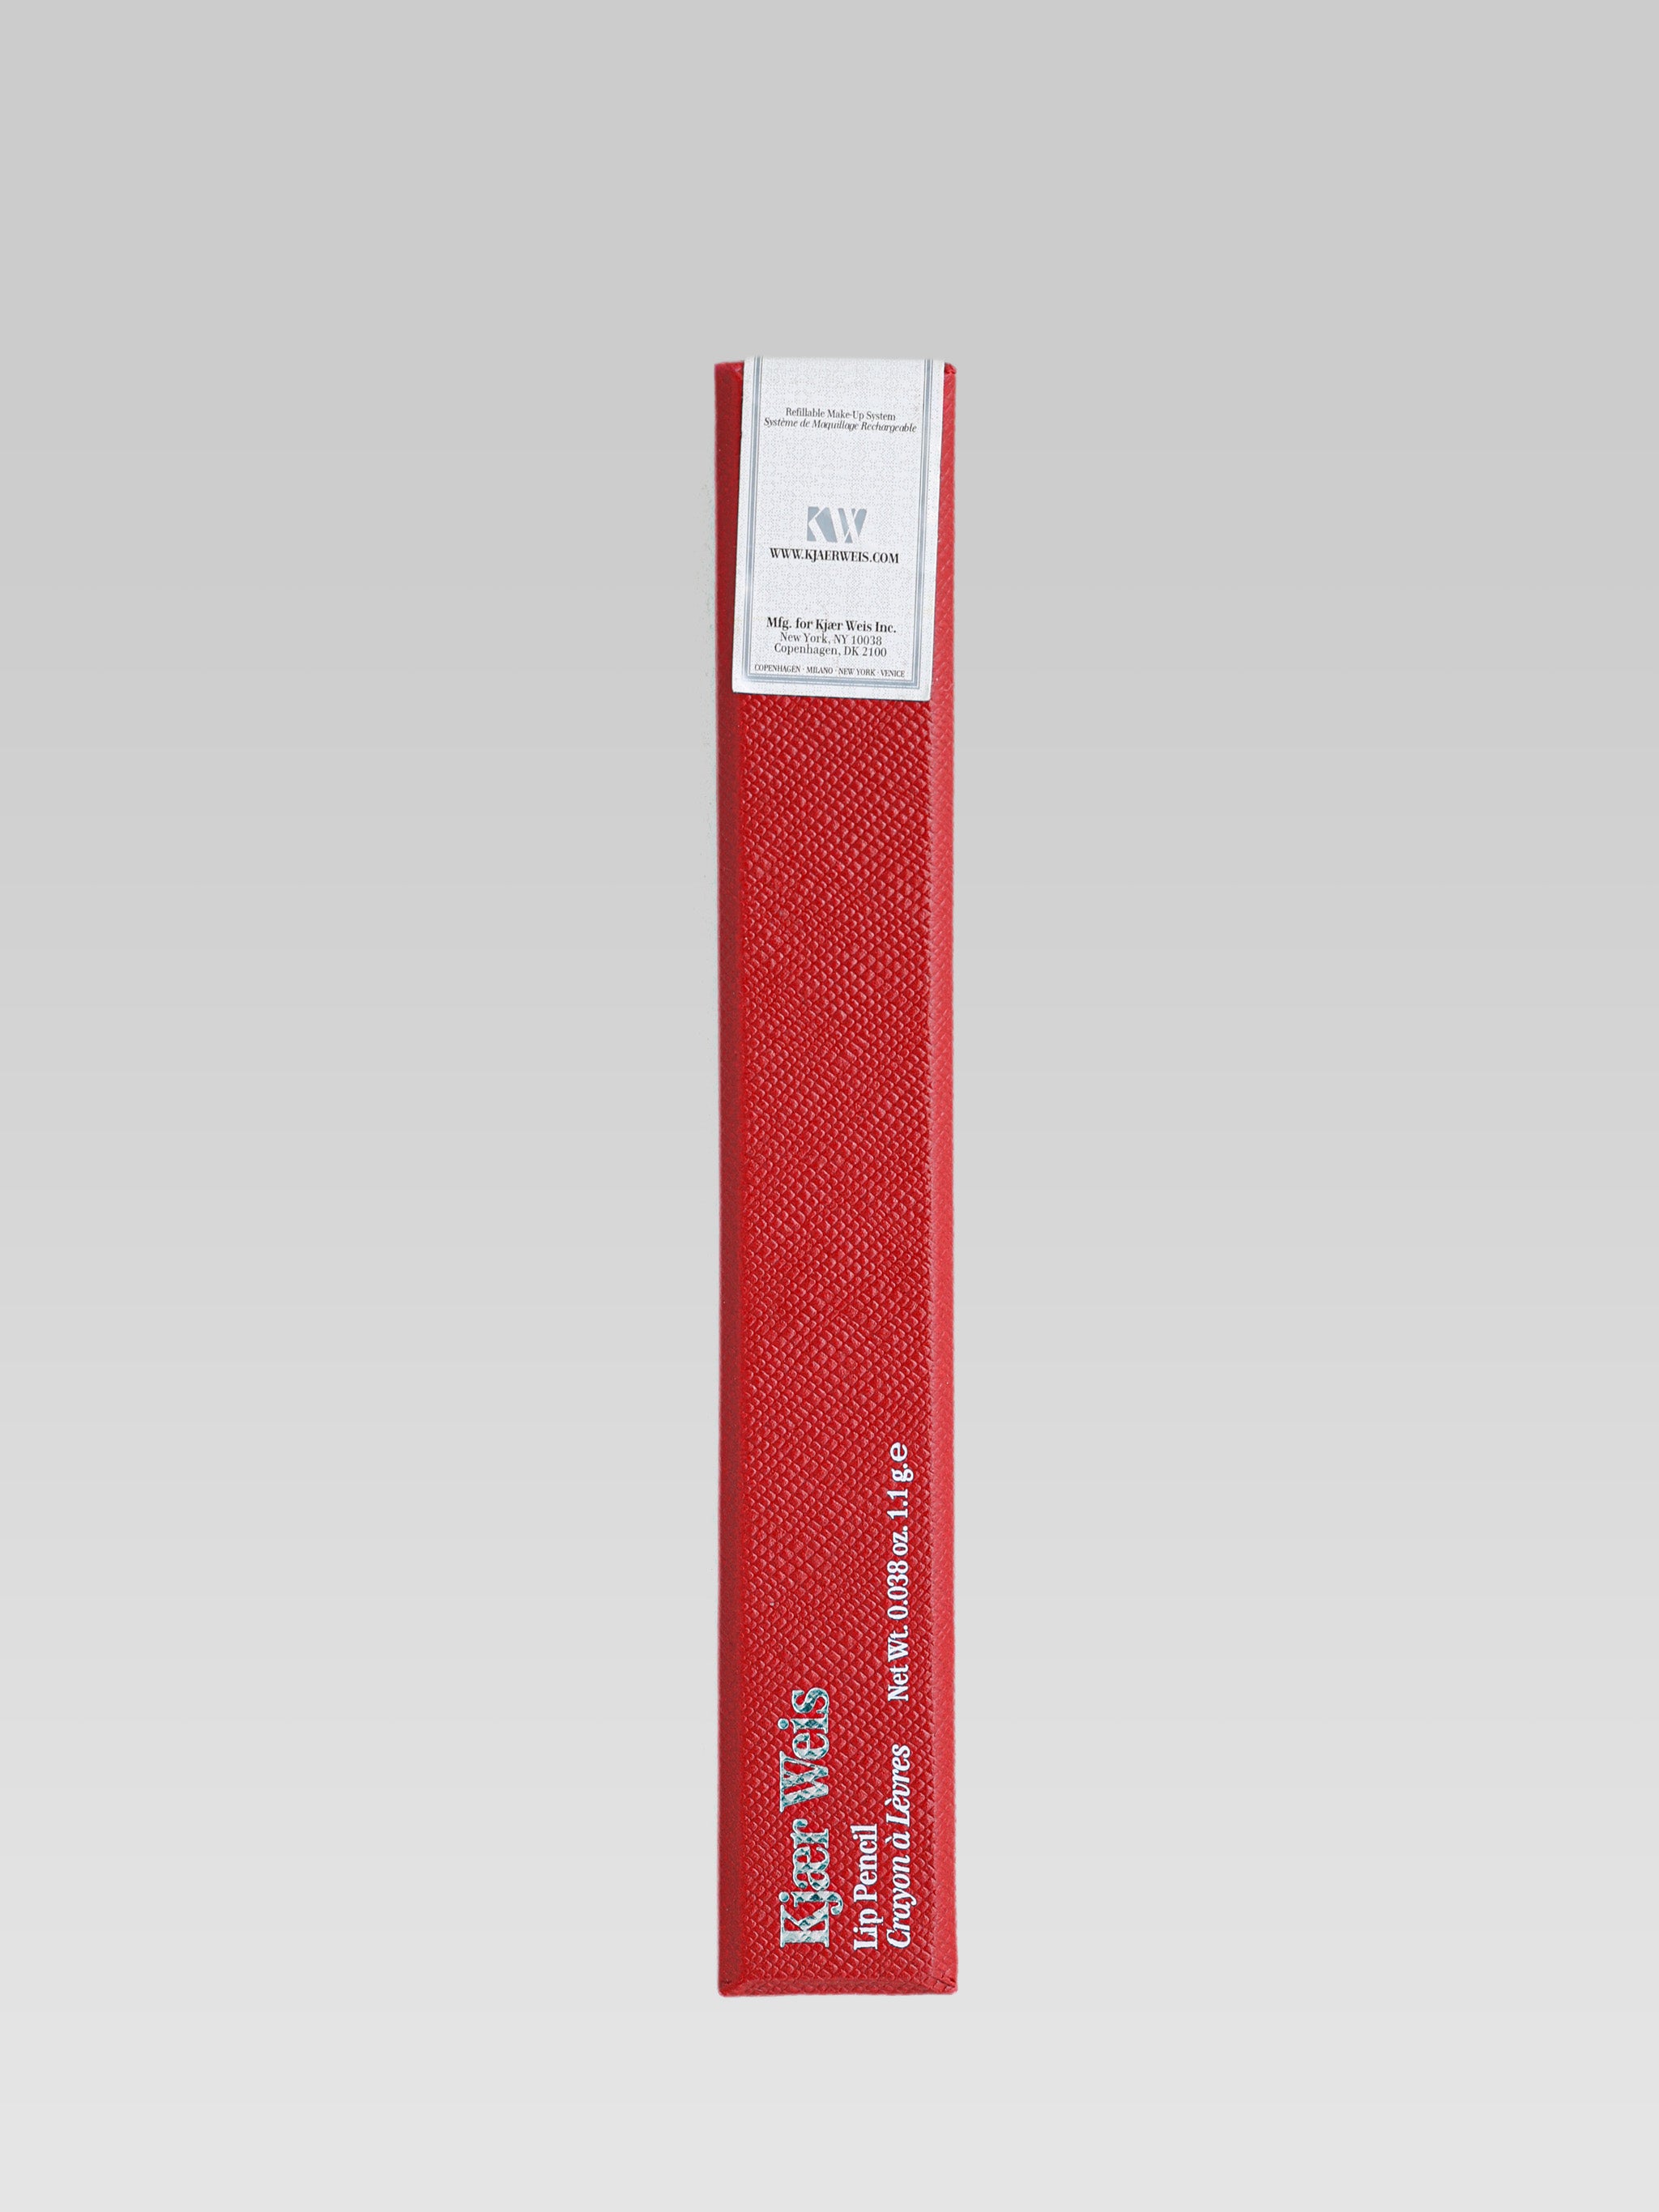 Kjaer Weis Lip Pencil product packaging red edition